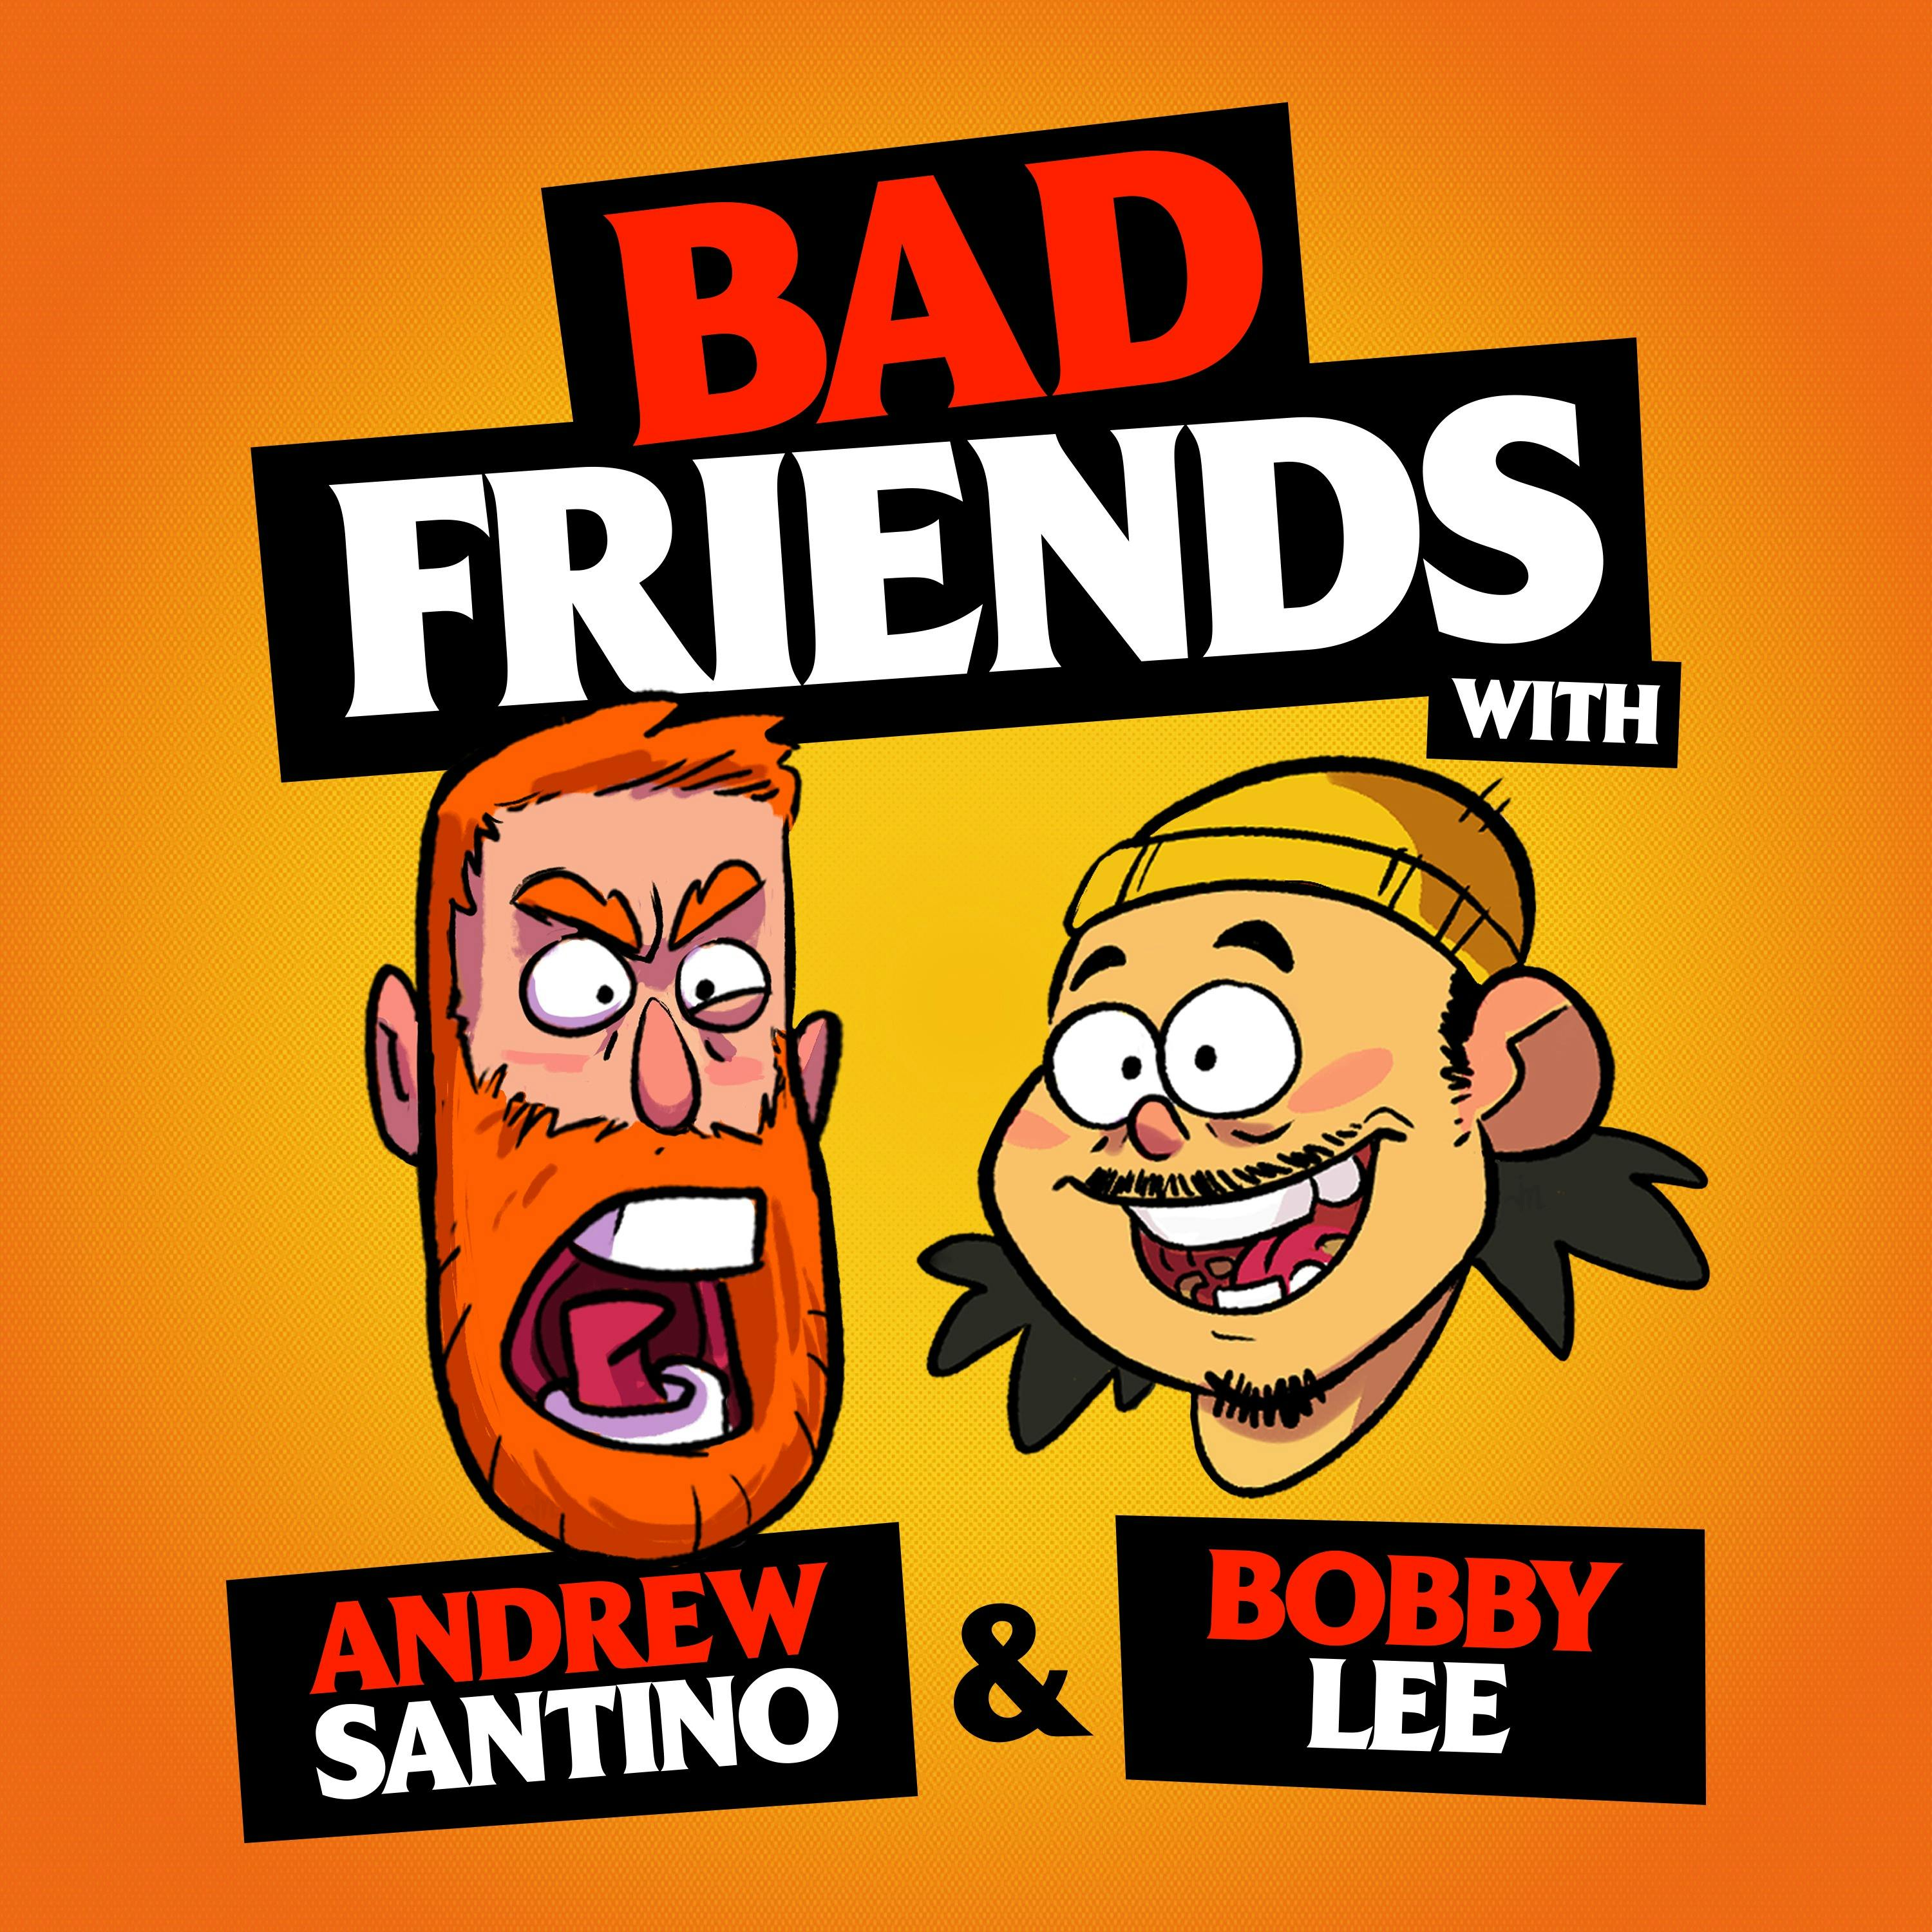 Ask Before You Touch by Andrew Santino and Bobby Lee